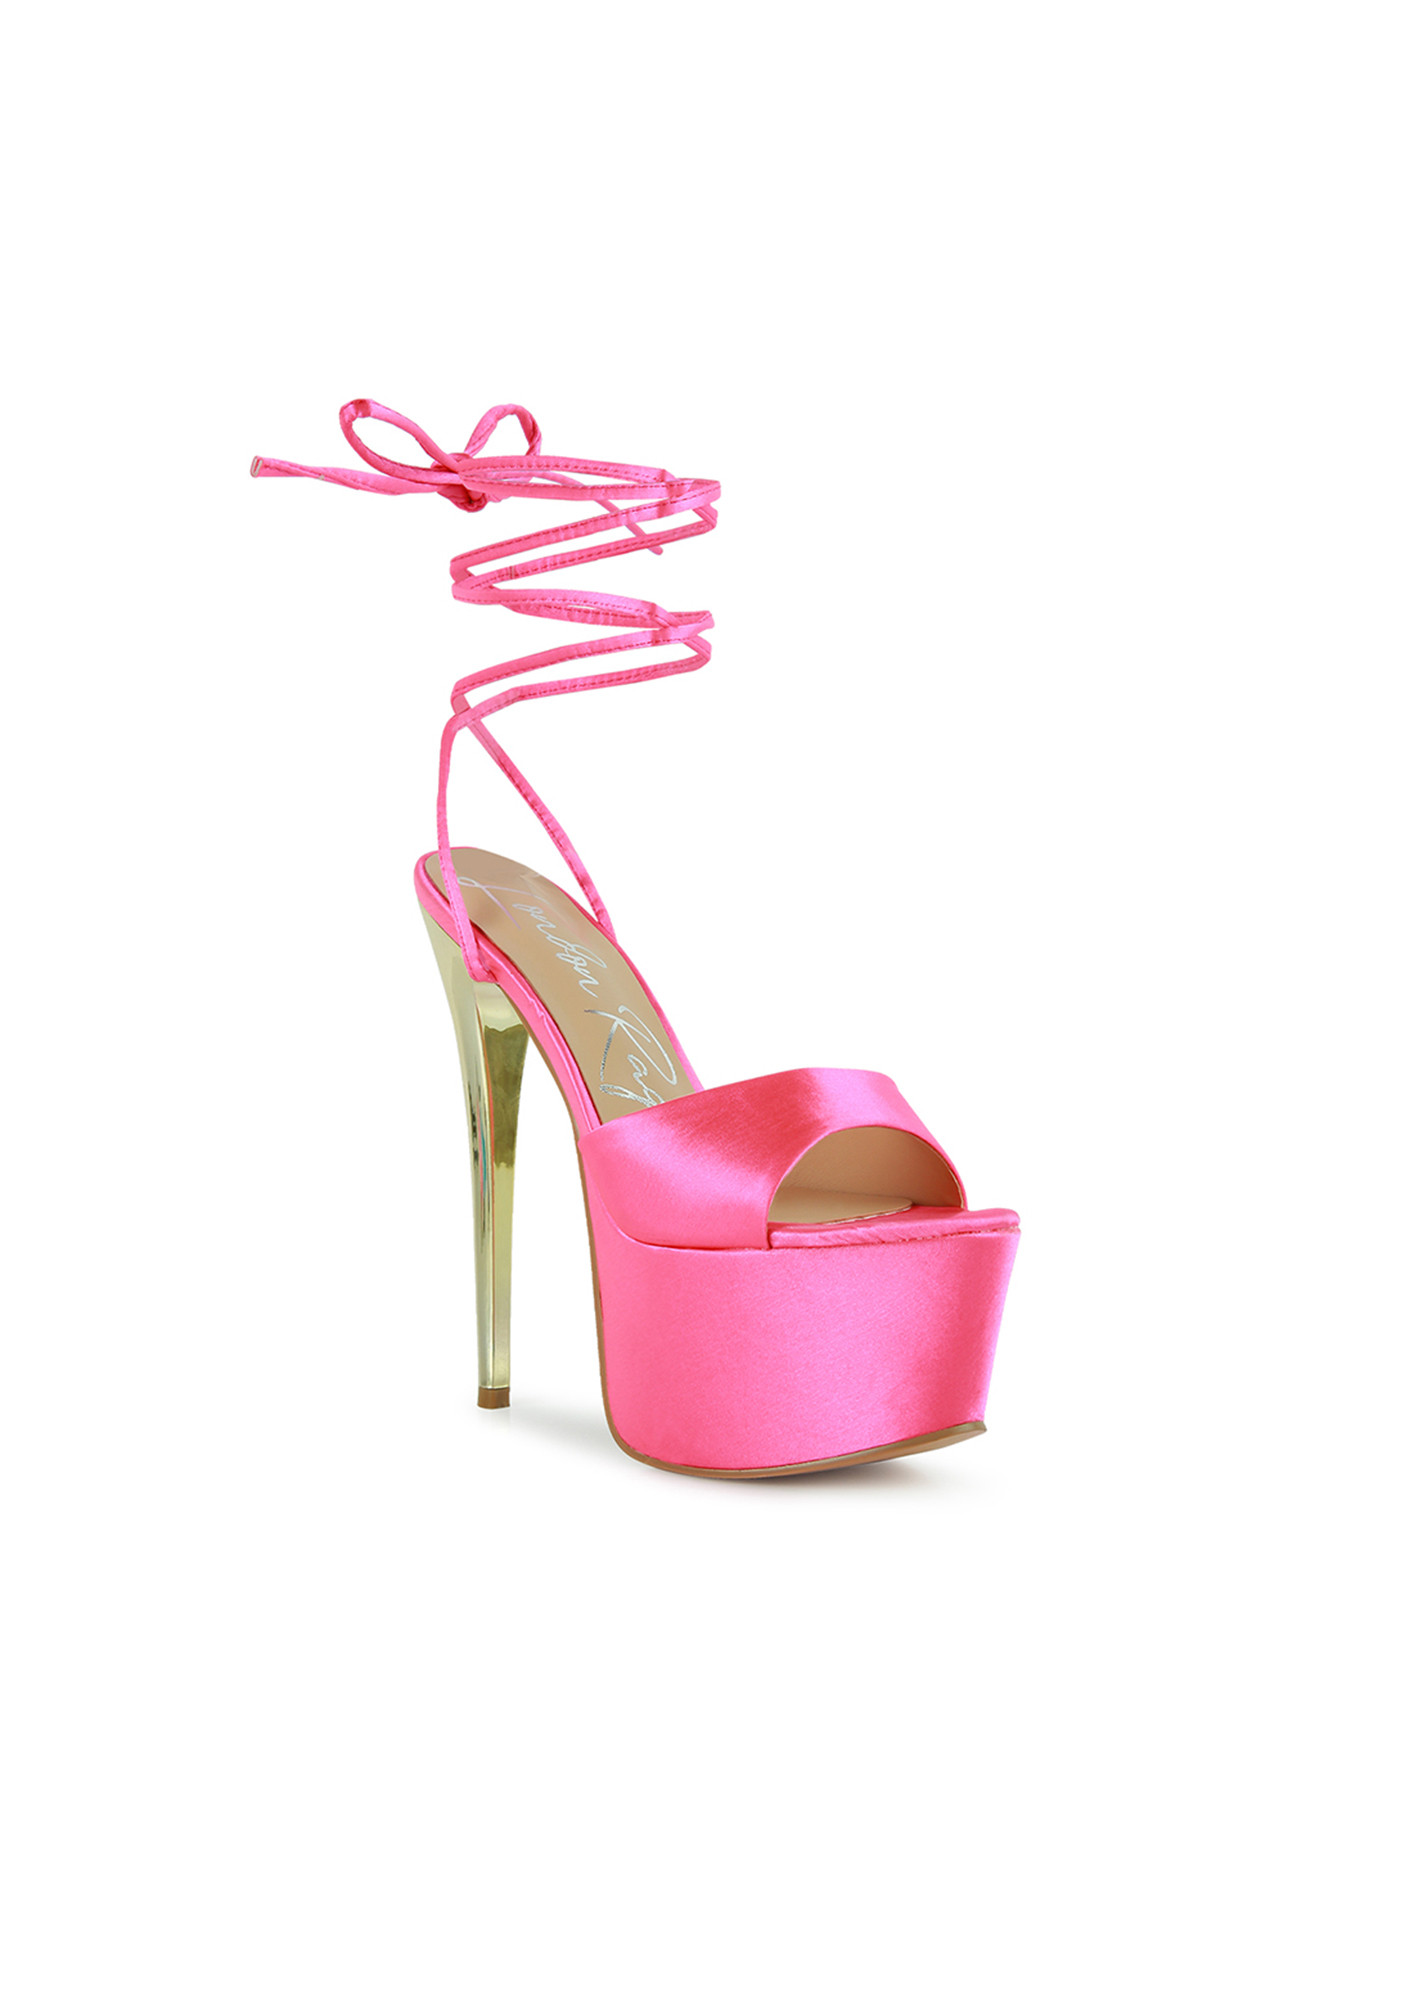 What I Really Want  Baby Pink Platform Sandals  DLSB